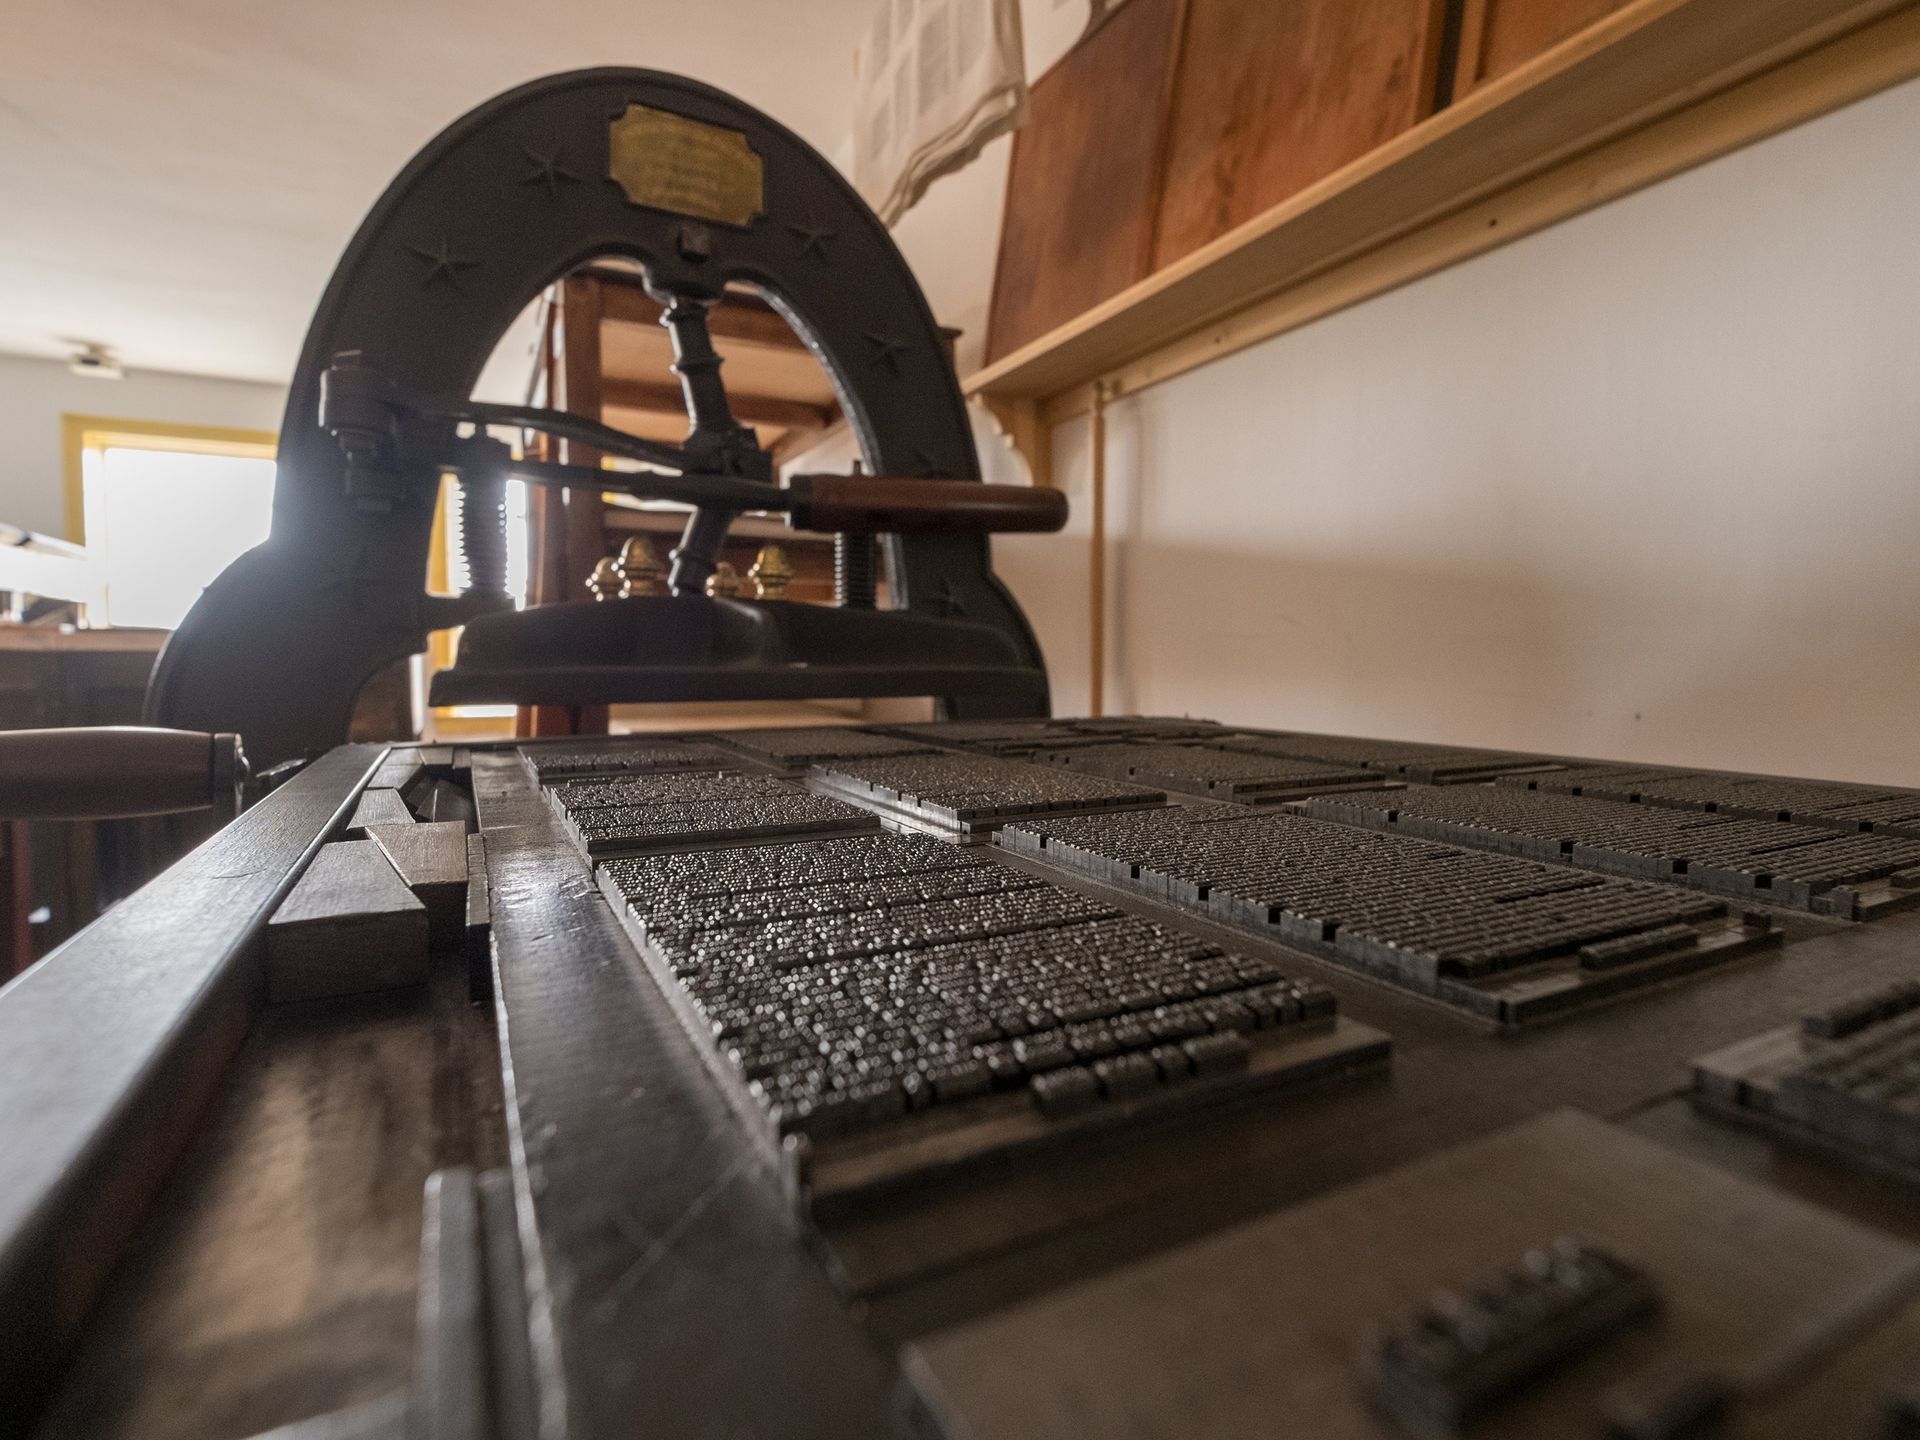 Replica of the printing press that printed the Book of Mormon.